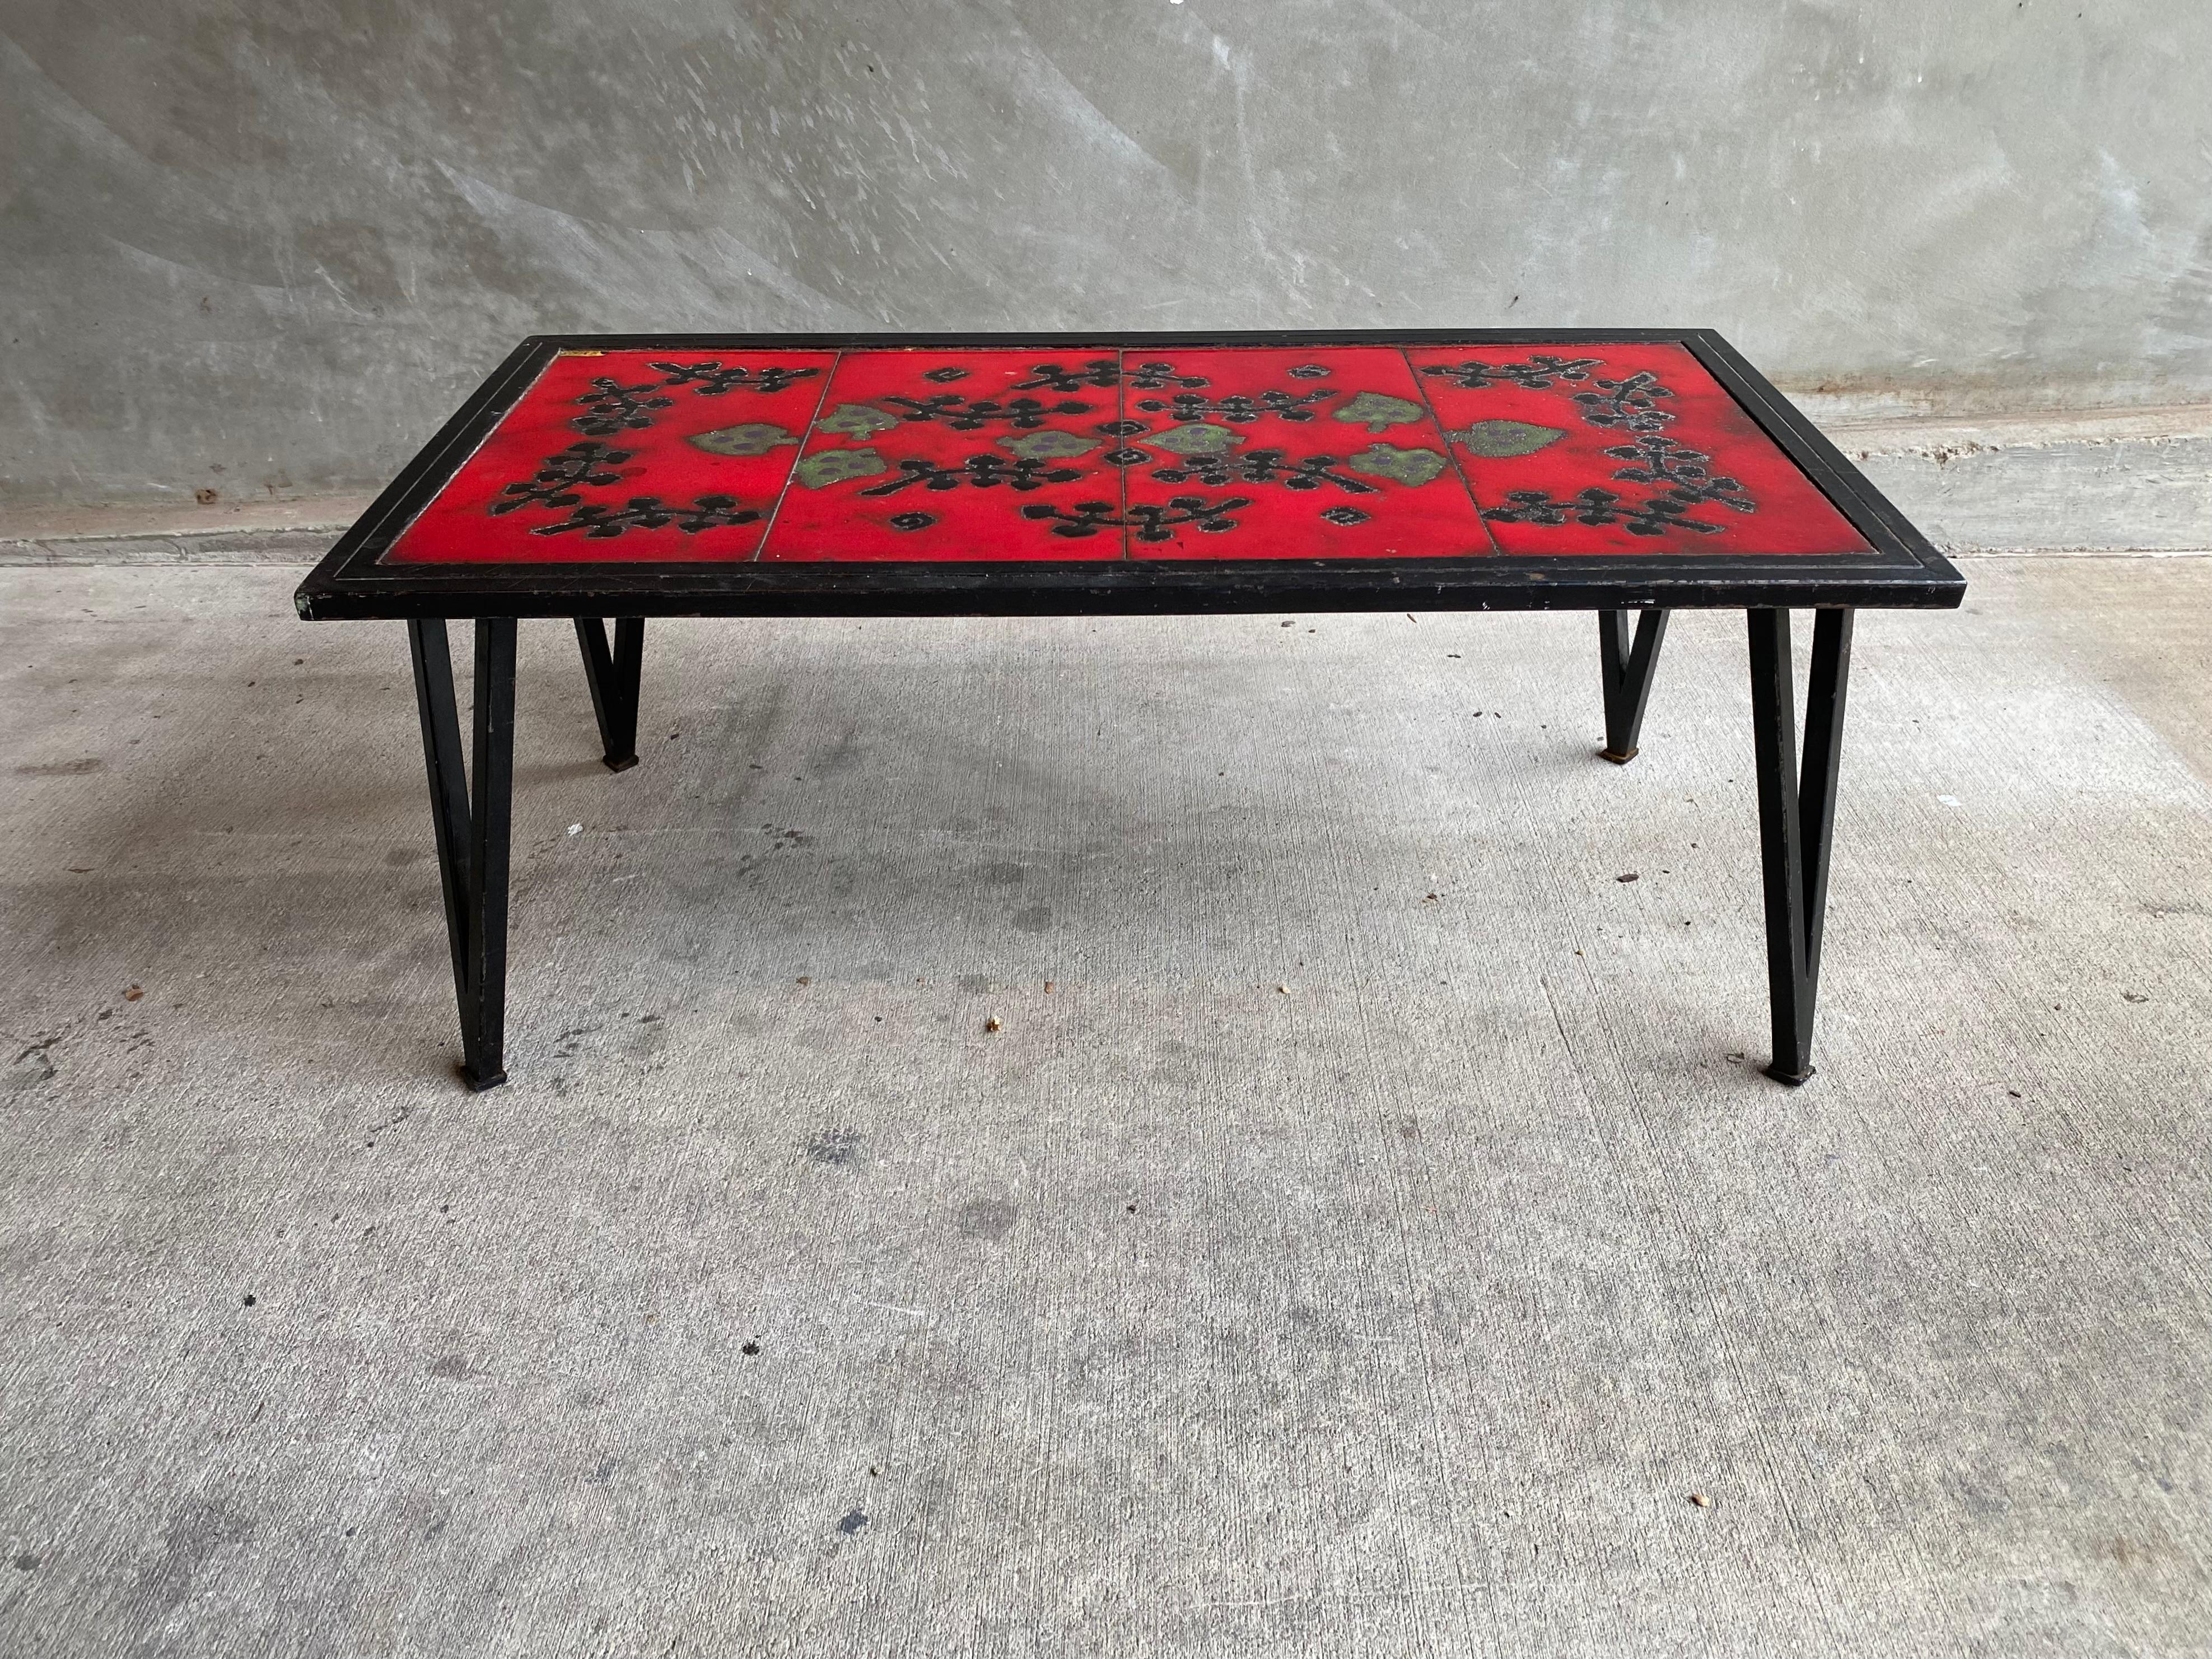 Mid-century glazed ceramic top cocktail table in the style of the French design partners Jacques Adnet and Guidette Carbonell. Steel frame supports 4-piece lava-style tile scene in red and black. France, 1950's.